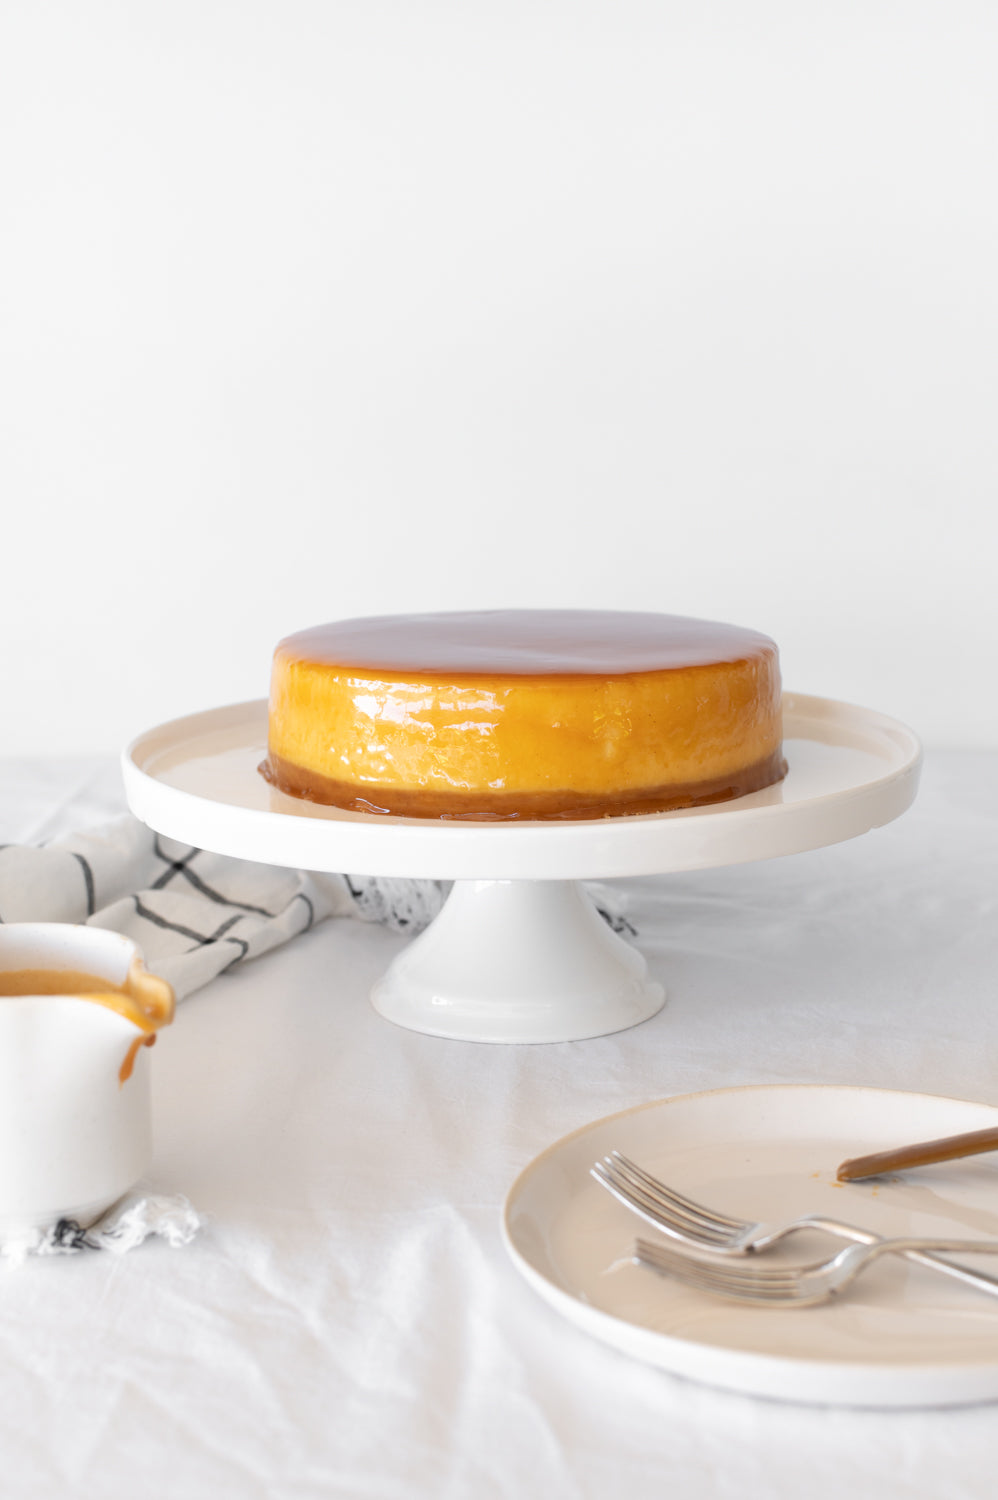 Salted Butter Caramel glazed Baked Cheesecake on a cake stand